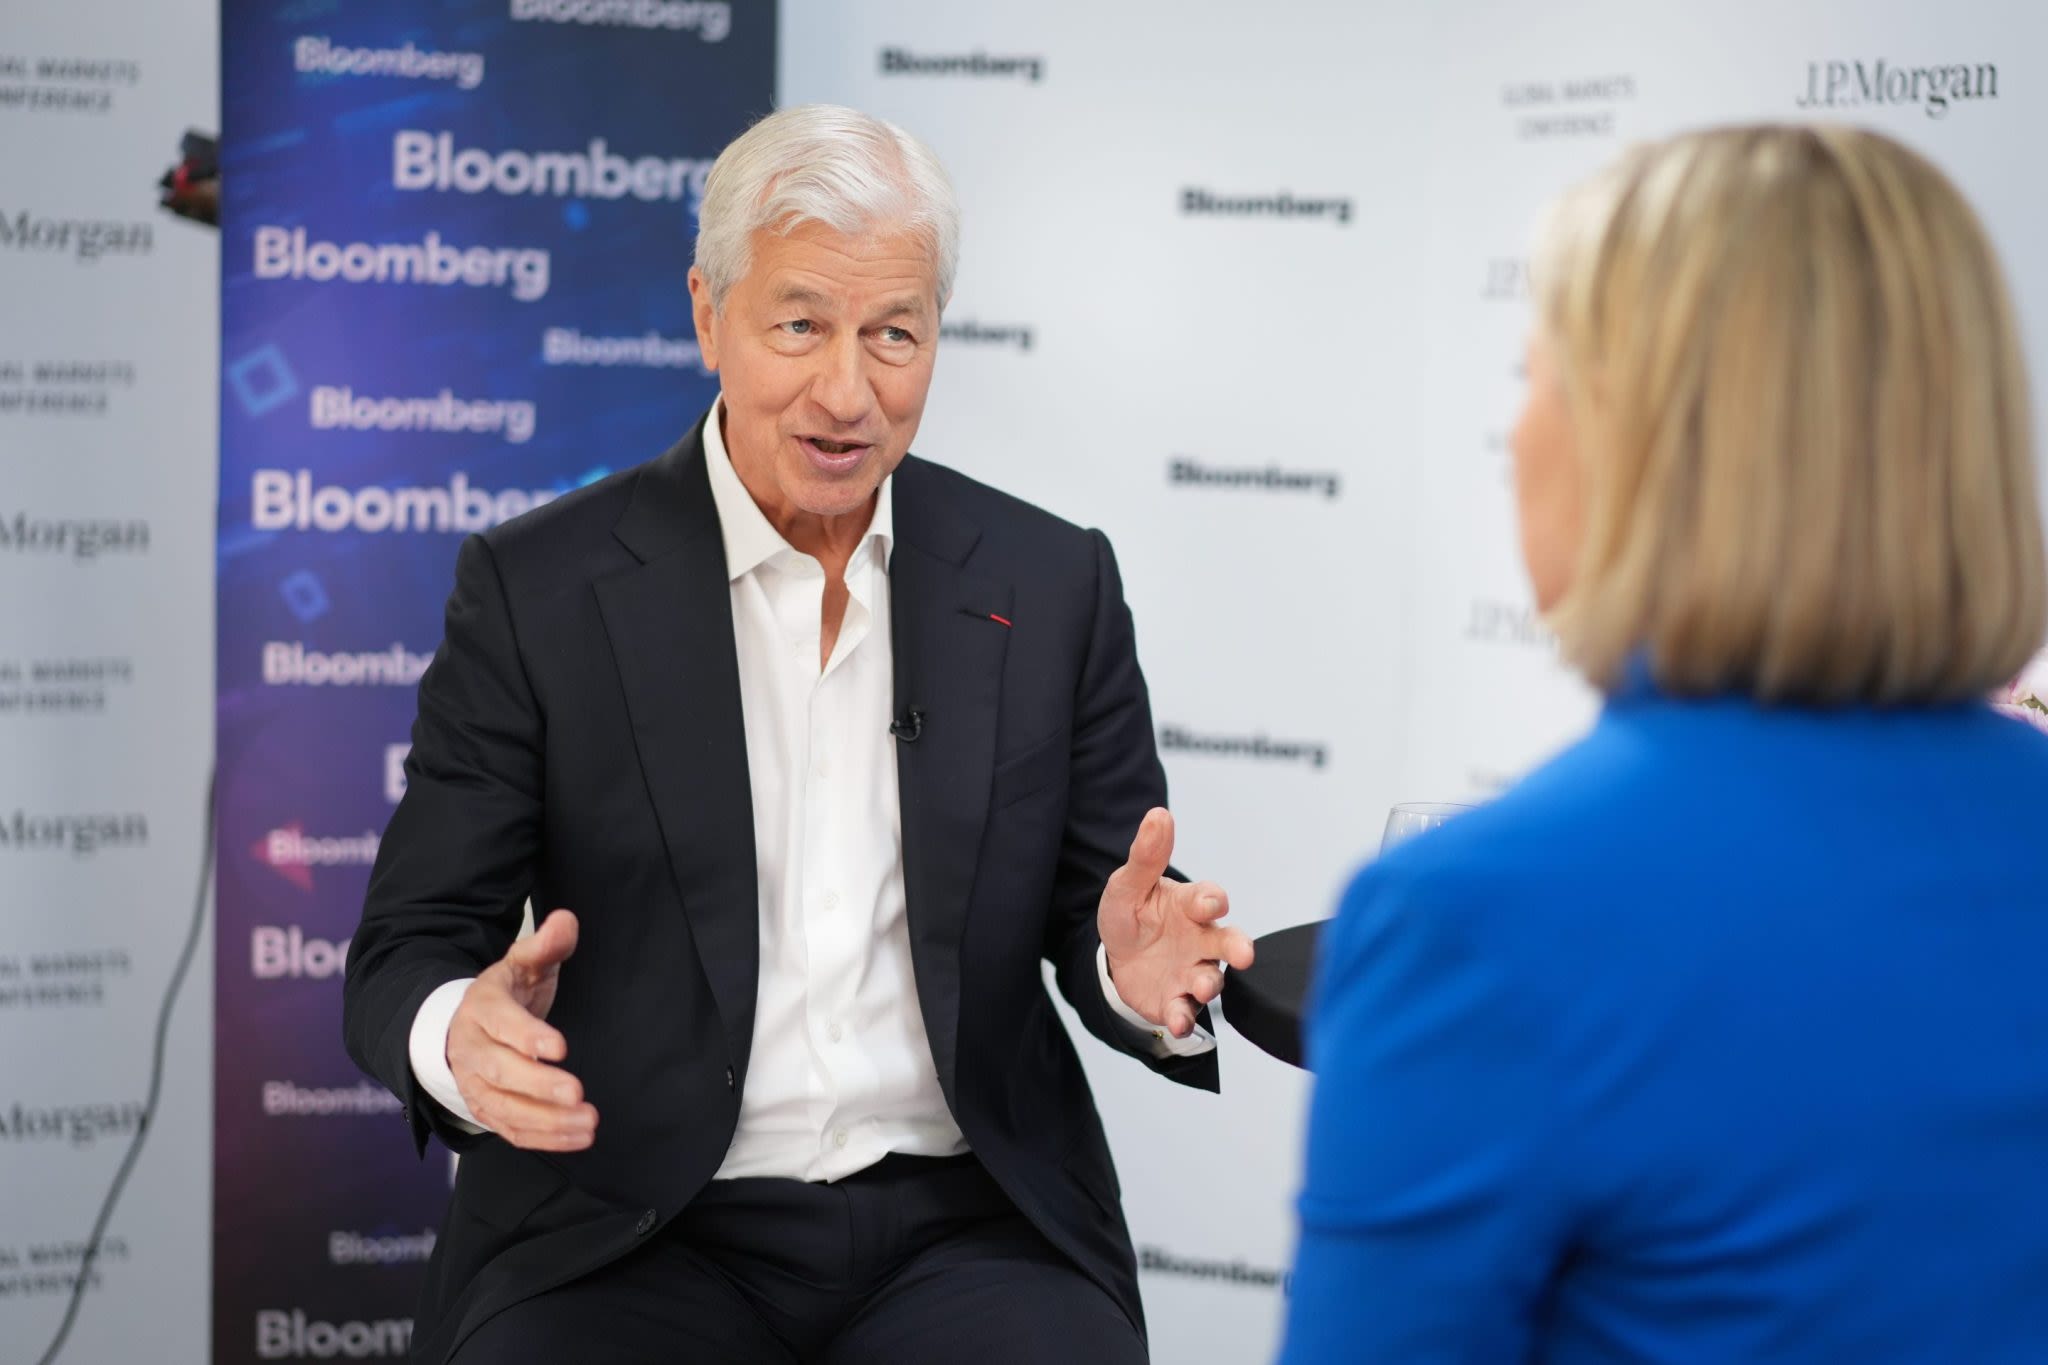 Jamie Dimon says some private credit ratings ‘shocked’ him, evoking bad memories of mortgages before the Great Recession: ‘There could be hell to pay’